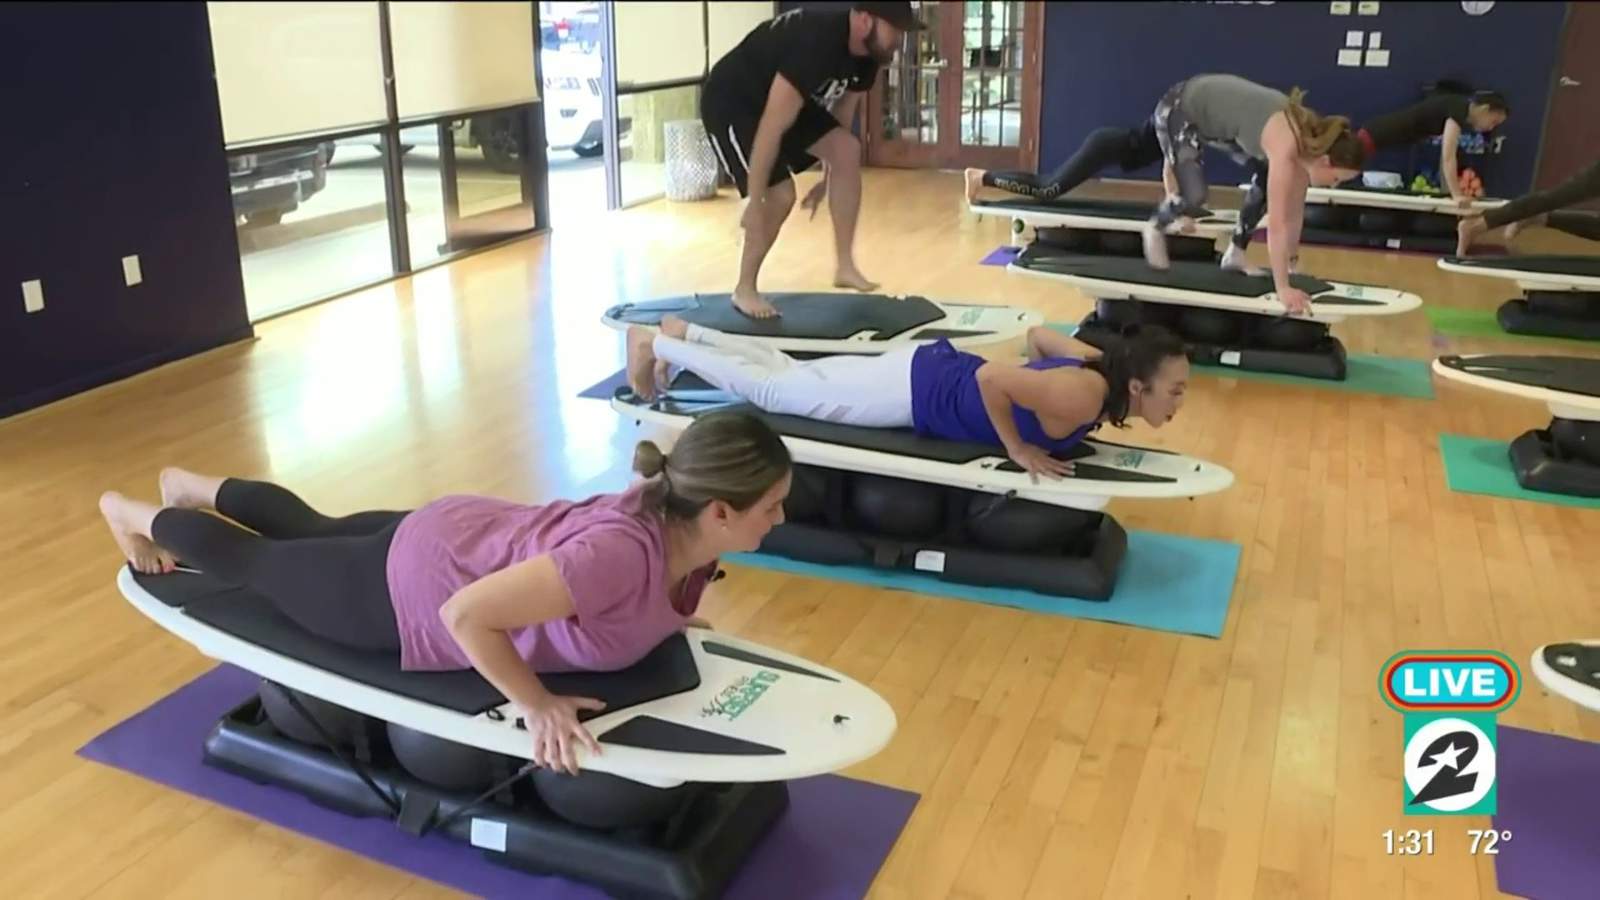 The surfset surfboard workout at Vibe Fitness will have you hanging ten in the new year